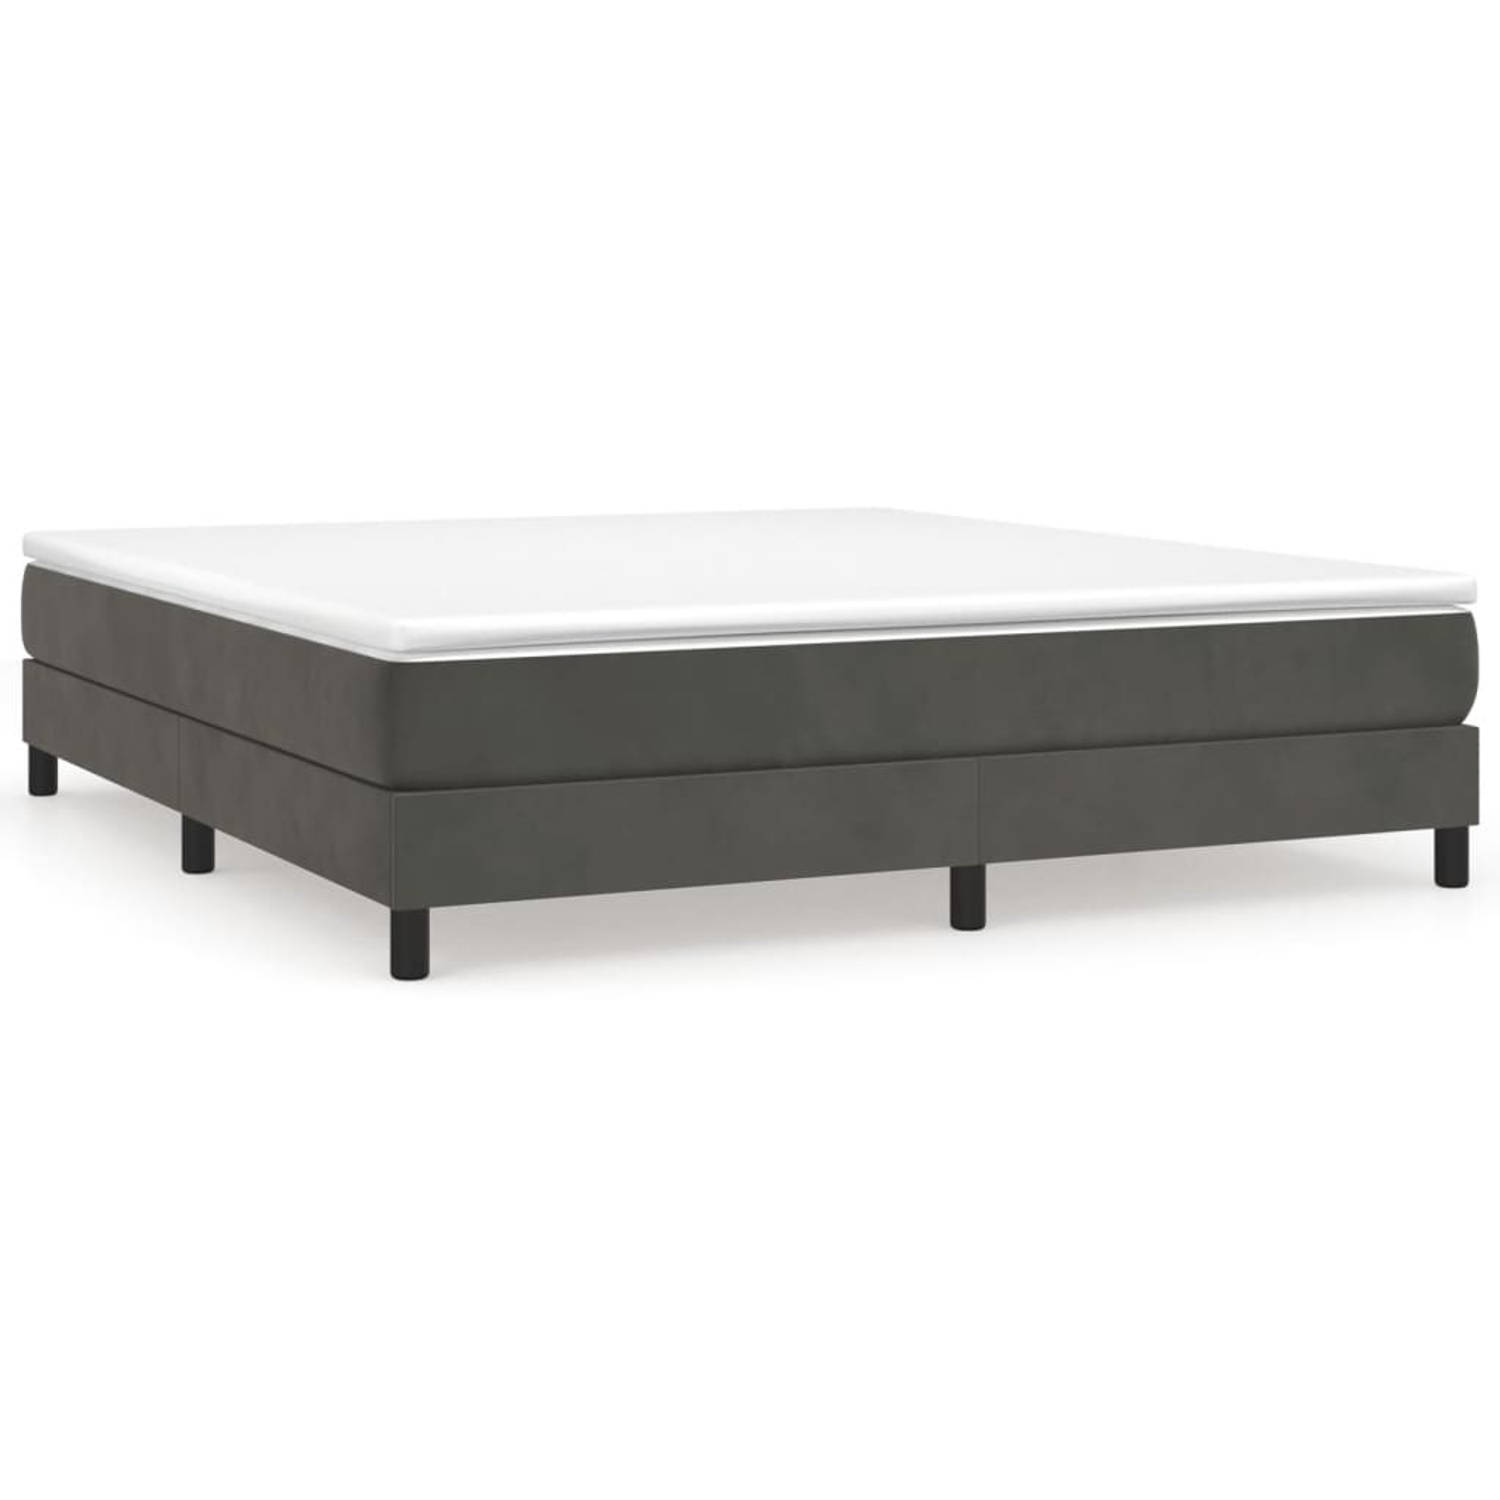 The Living Store Boxspring Frame - Donkergrijs - 203 x 160 x 25 cm - Stof (100% polyester) - Multiplex